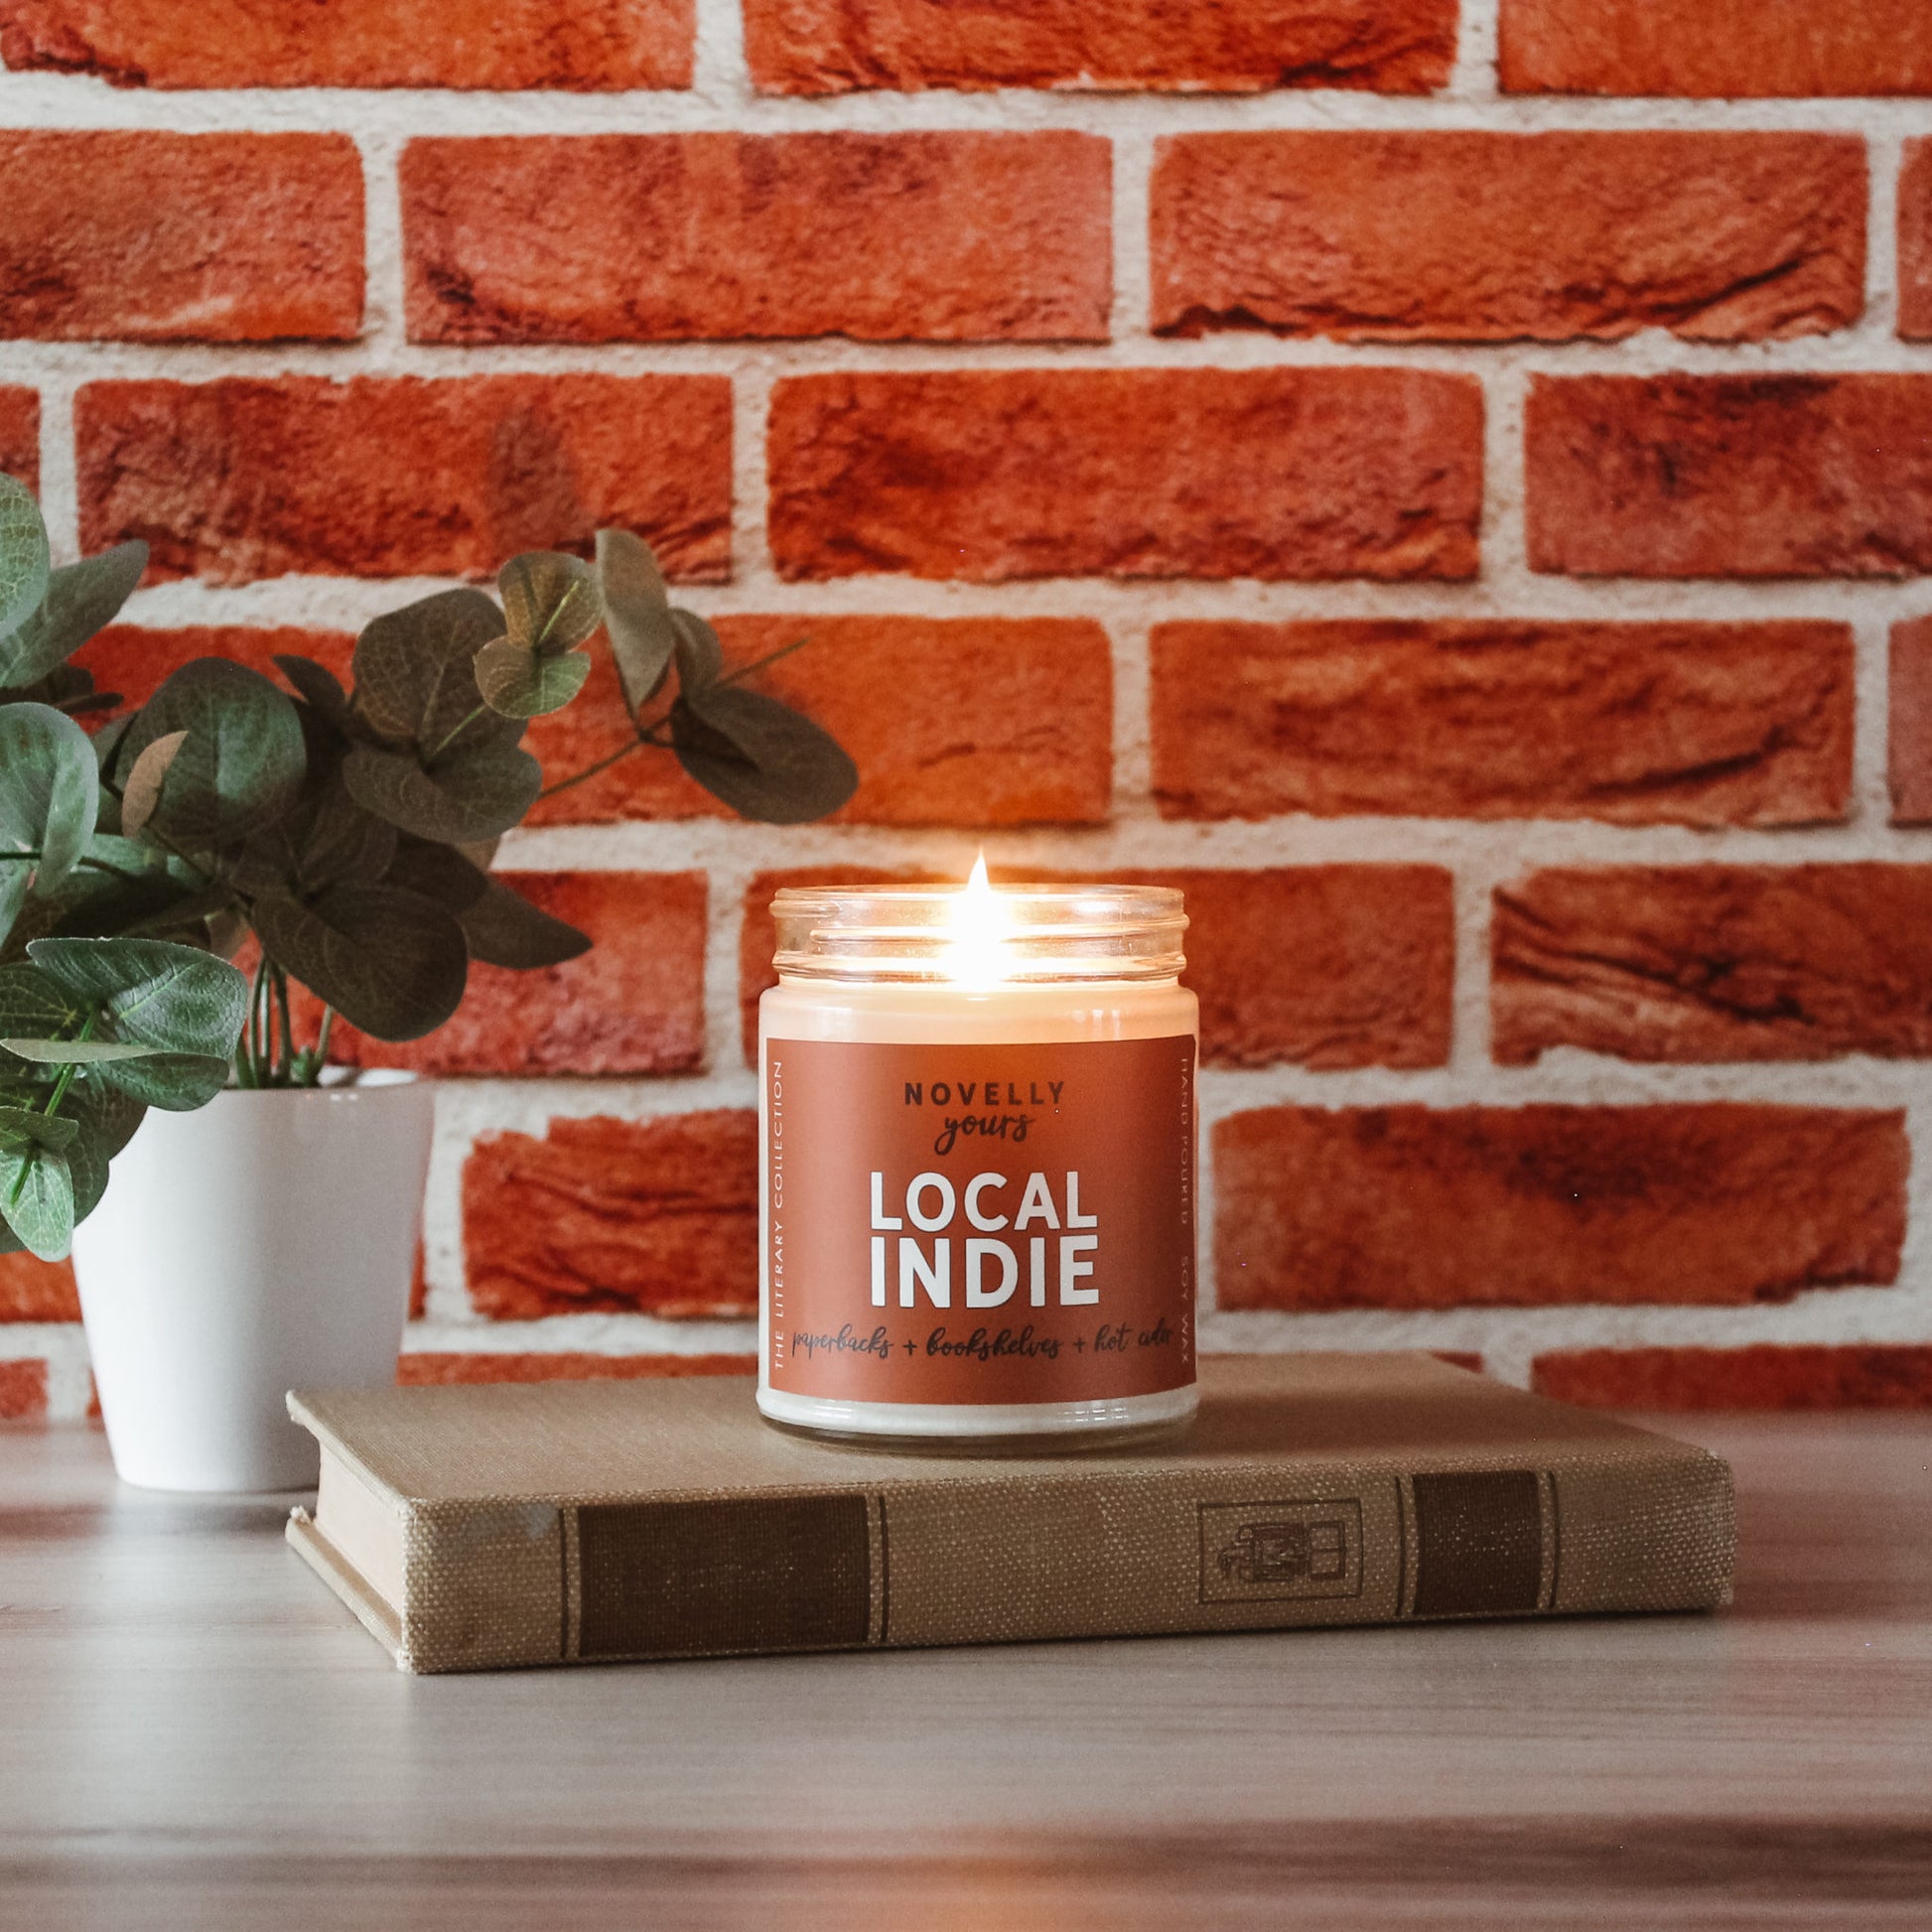 Local indie scented soy wax candle with burnt orange label in clear glass jar with white lid. sits on top of old book, candle is lit, all against red brick background